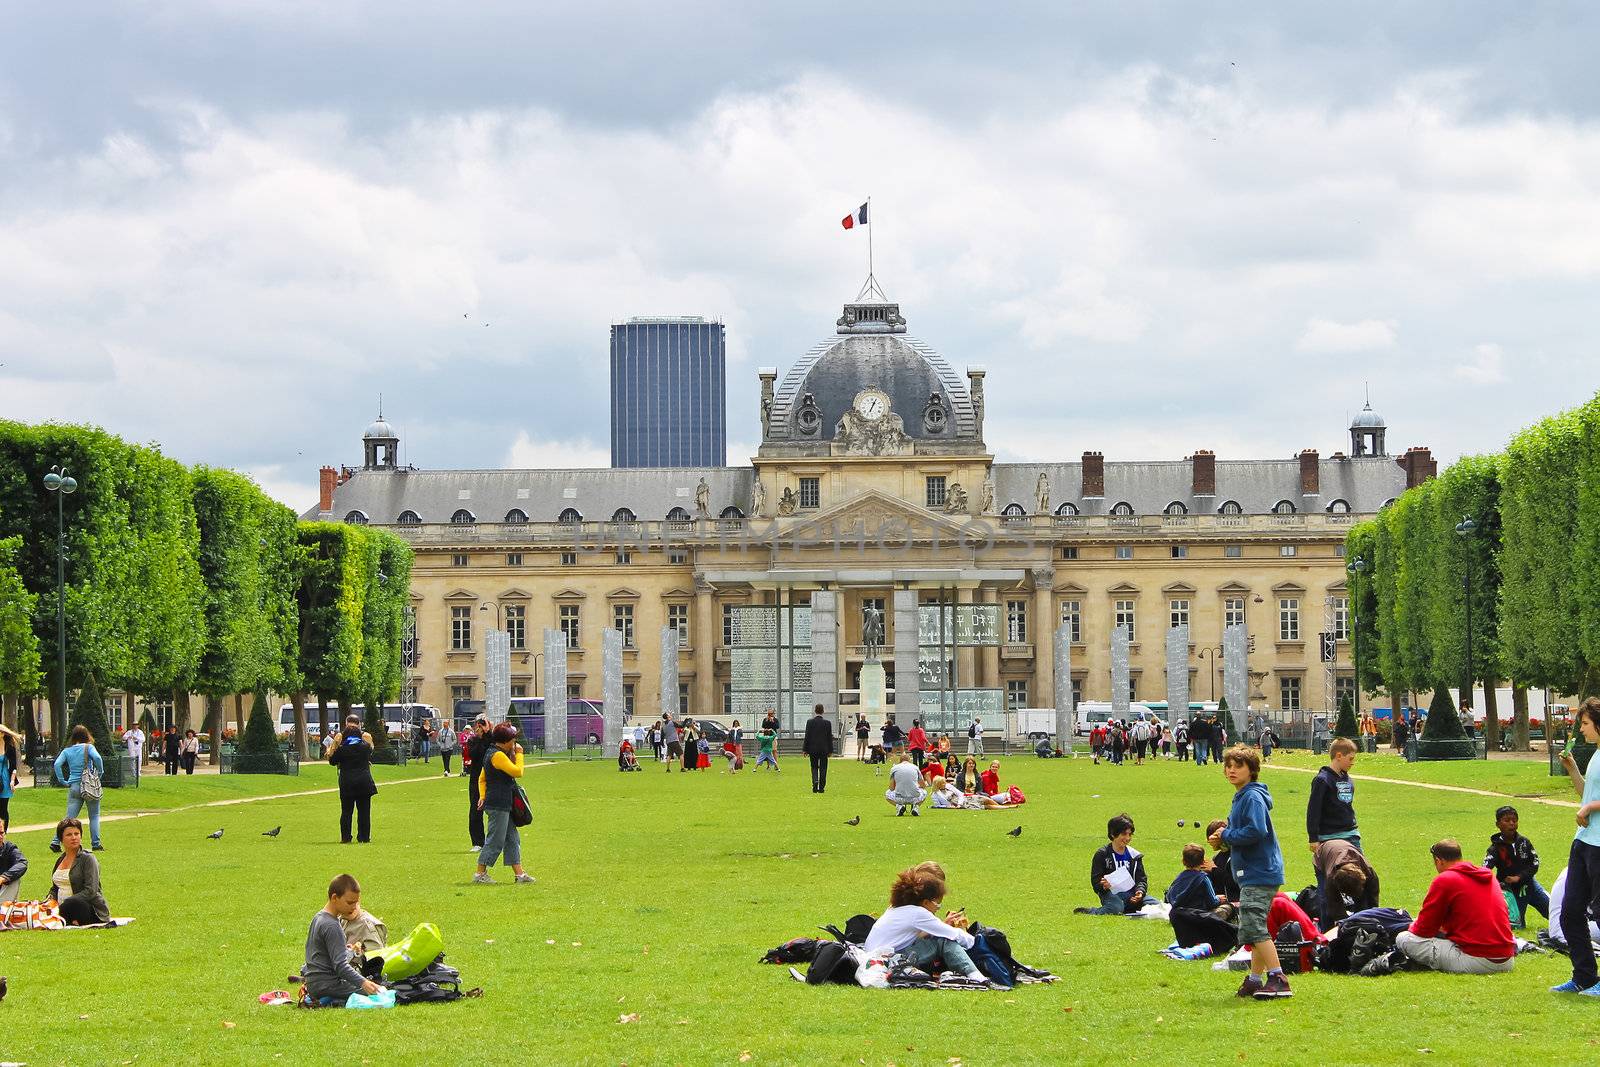 Parisians and tourists on lawn Champs de Mars in Paris. France by NickNick